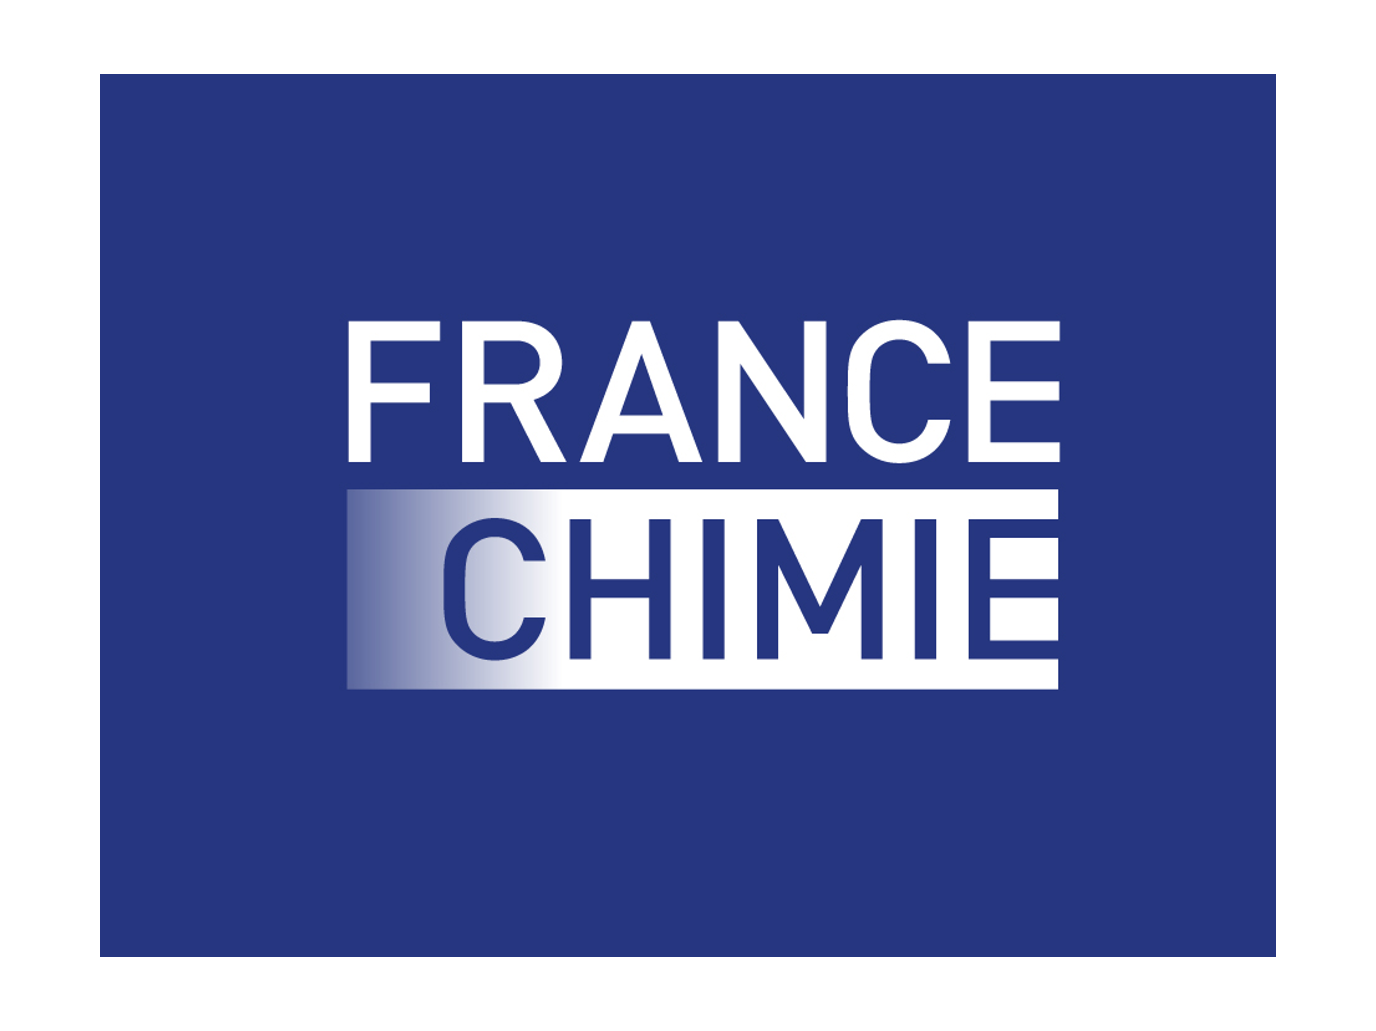 France chimie